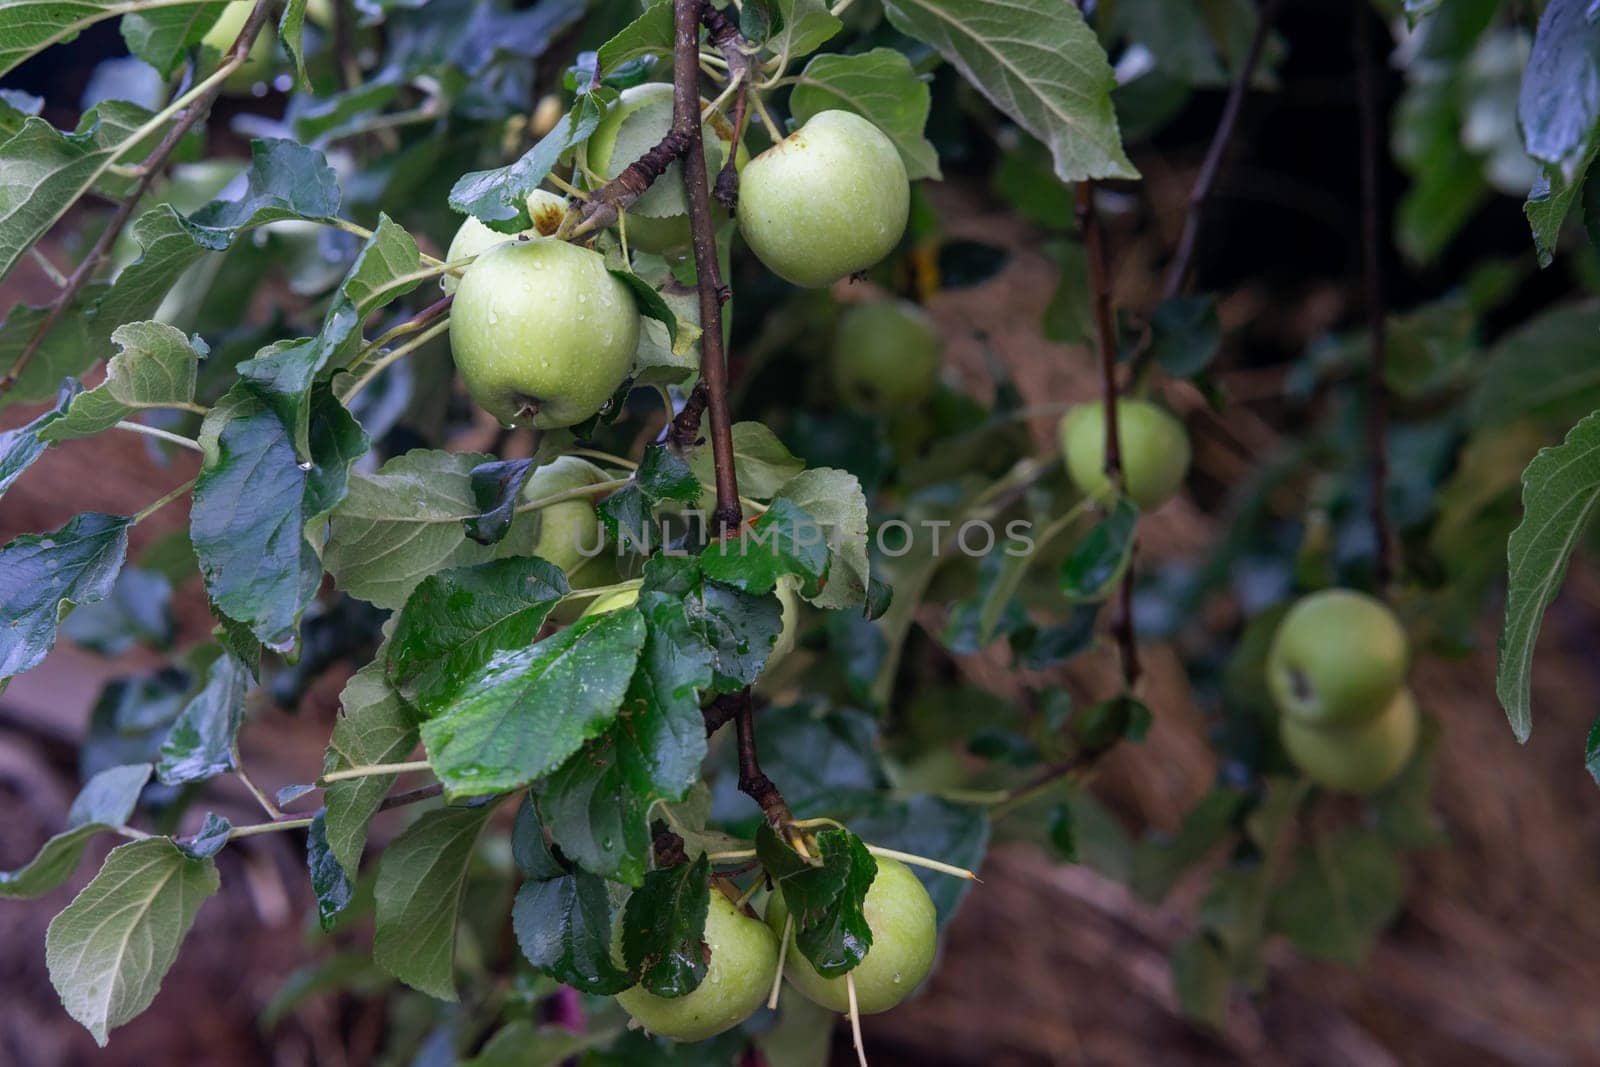 Several green apples on a branch of an apple tree. Raindrops on green apples by Serhii_Voroshchuk